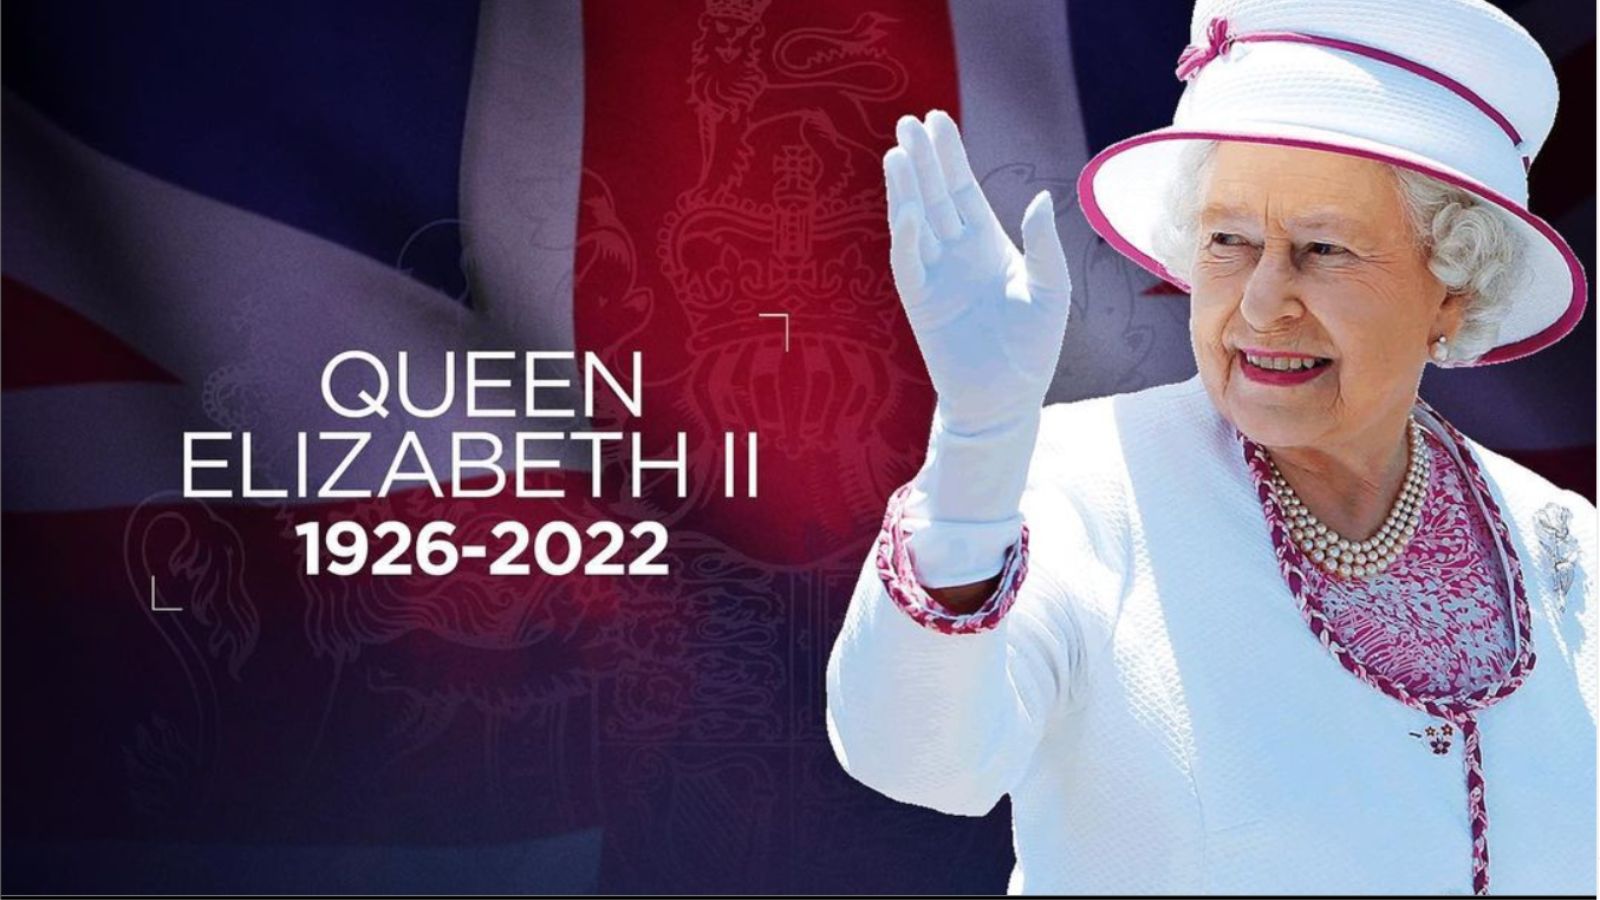 Queen Elizabeth II: The Legacy - Our News